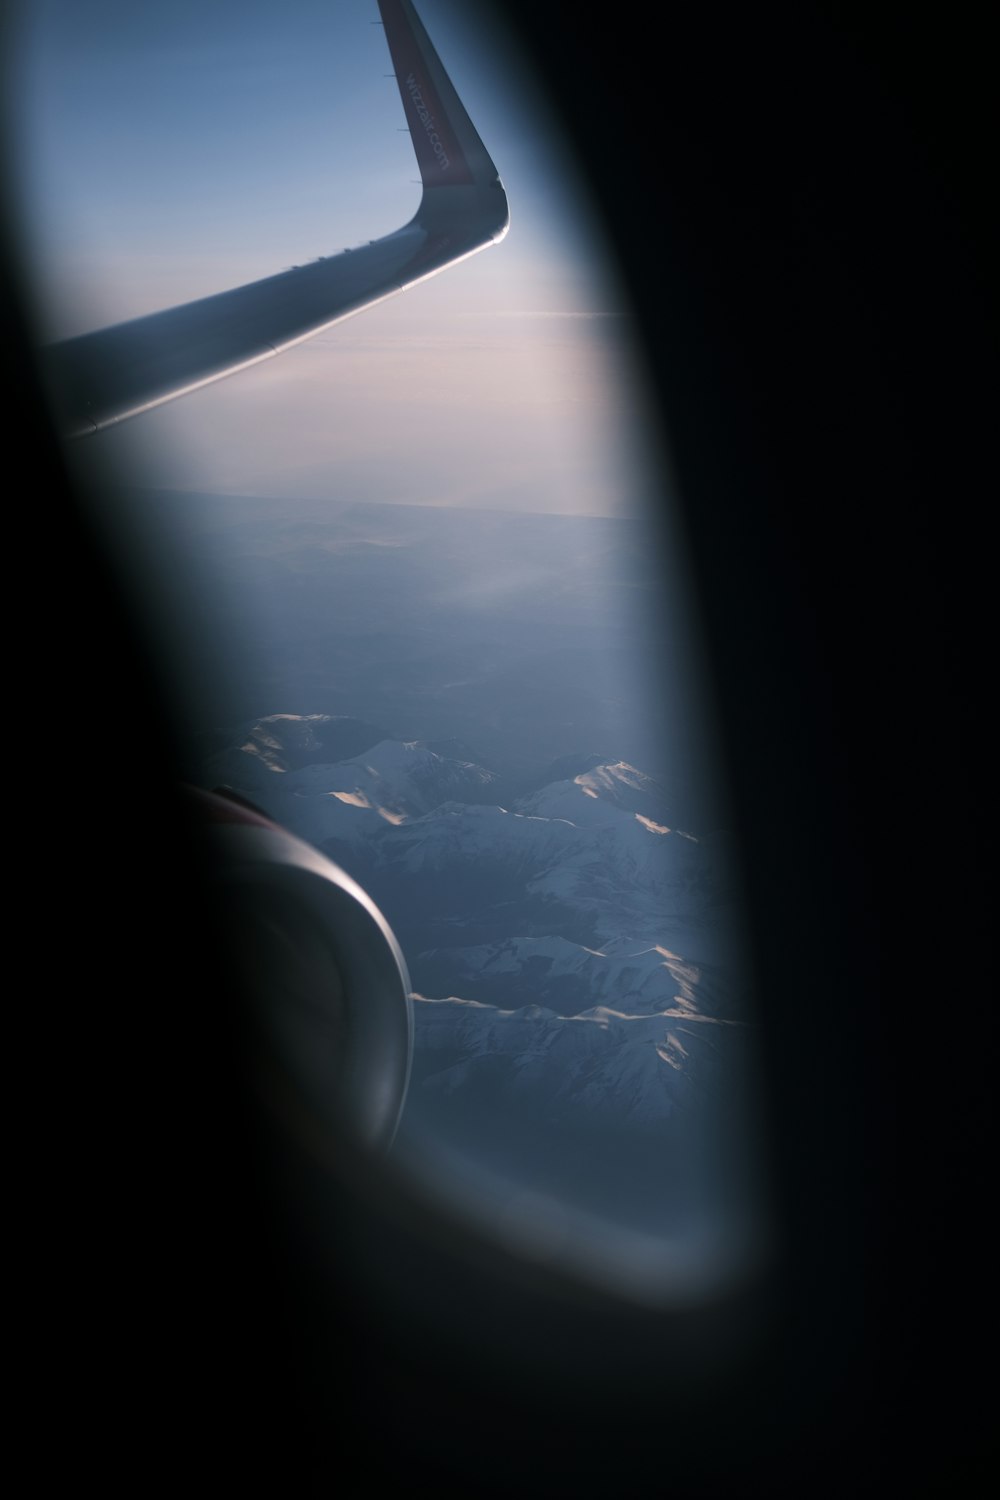 a view of the wing of an airplane